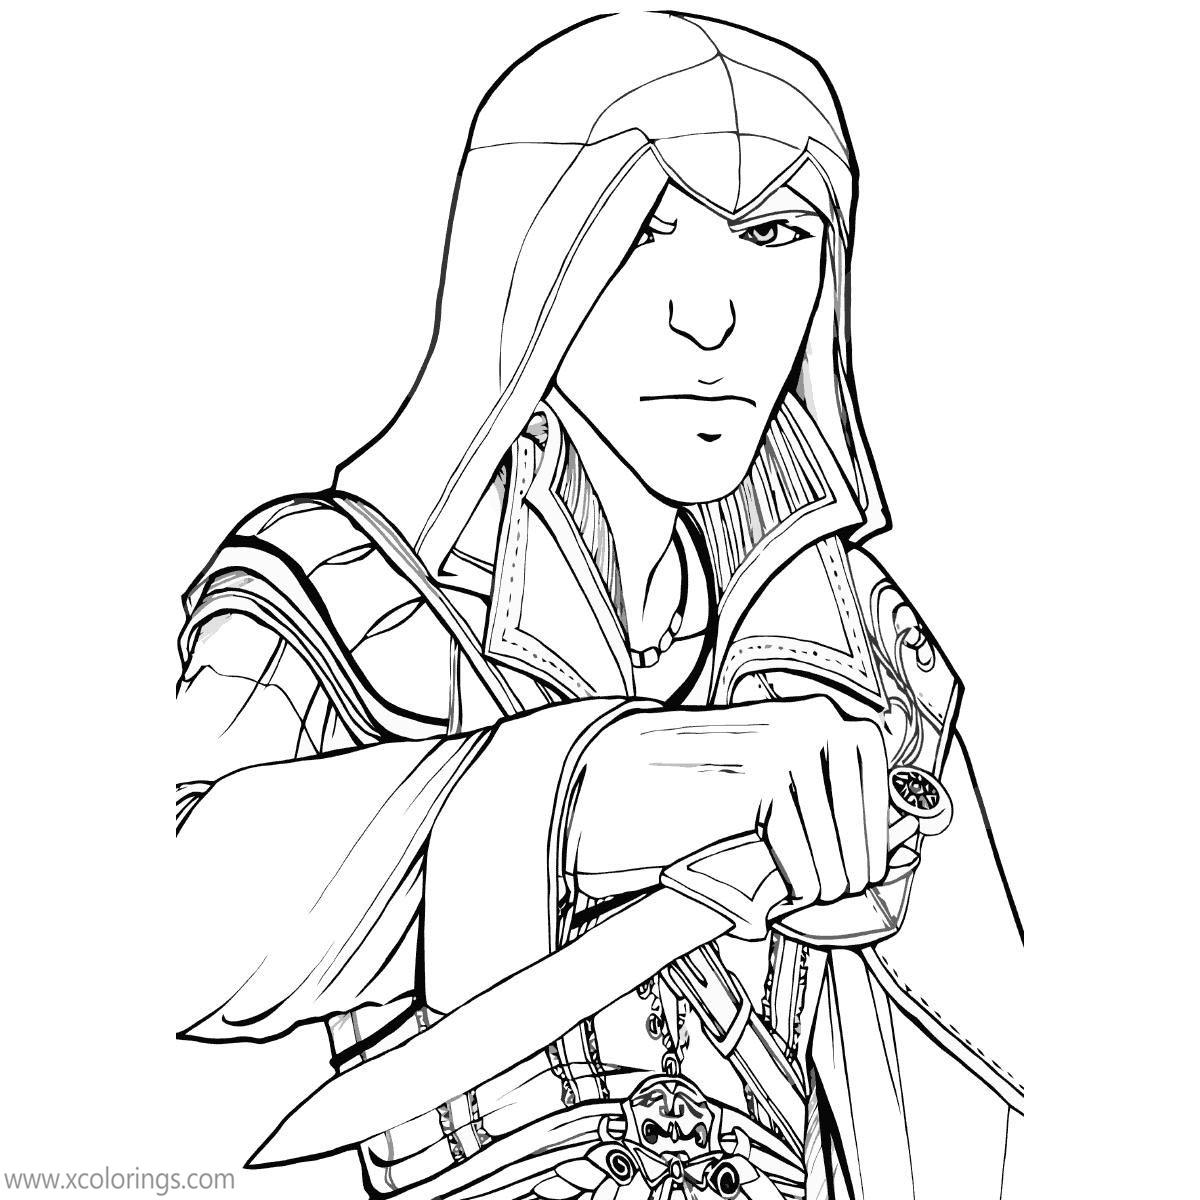 Free Assassin's Creed Coloring Pages Character with Knife printable